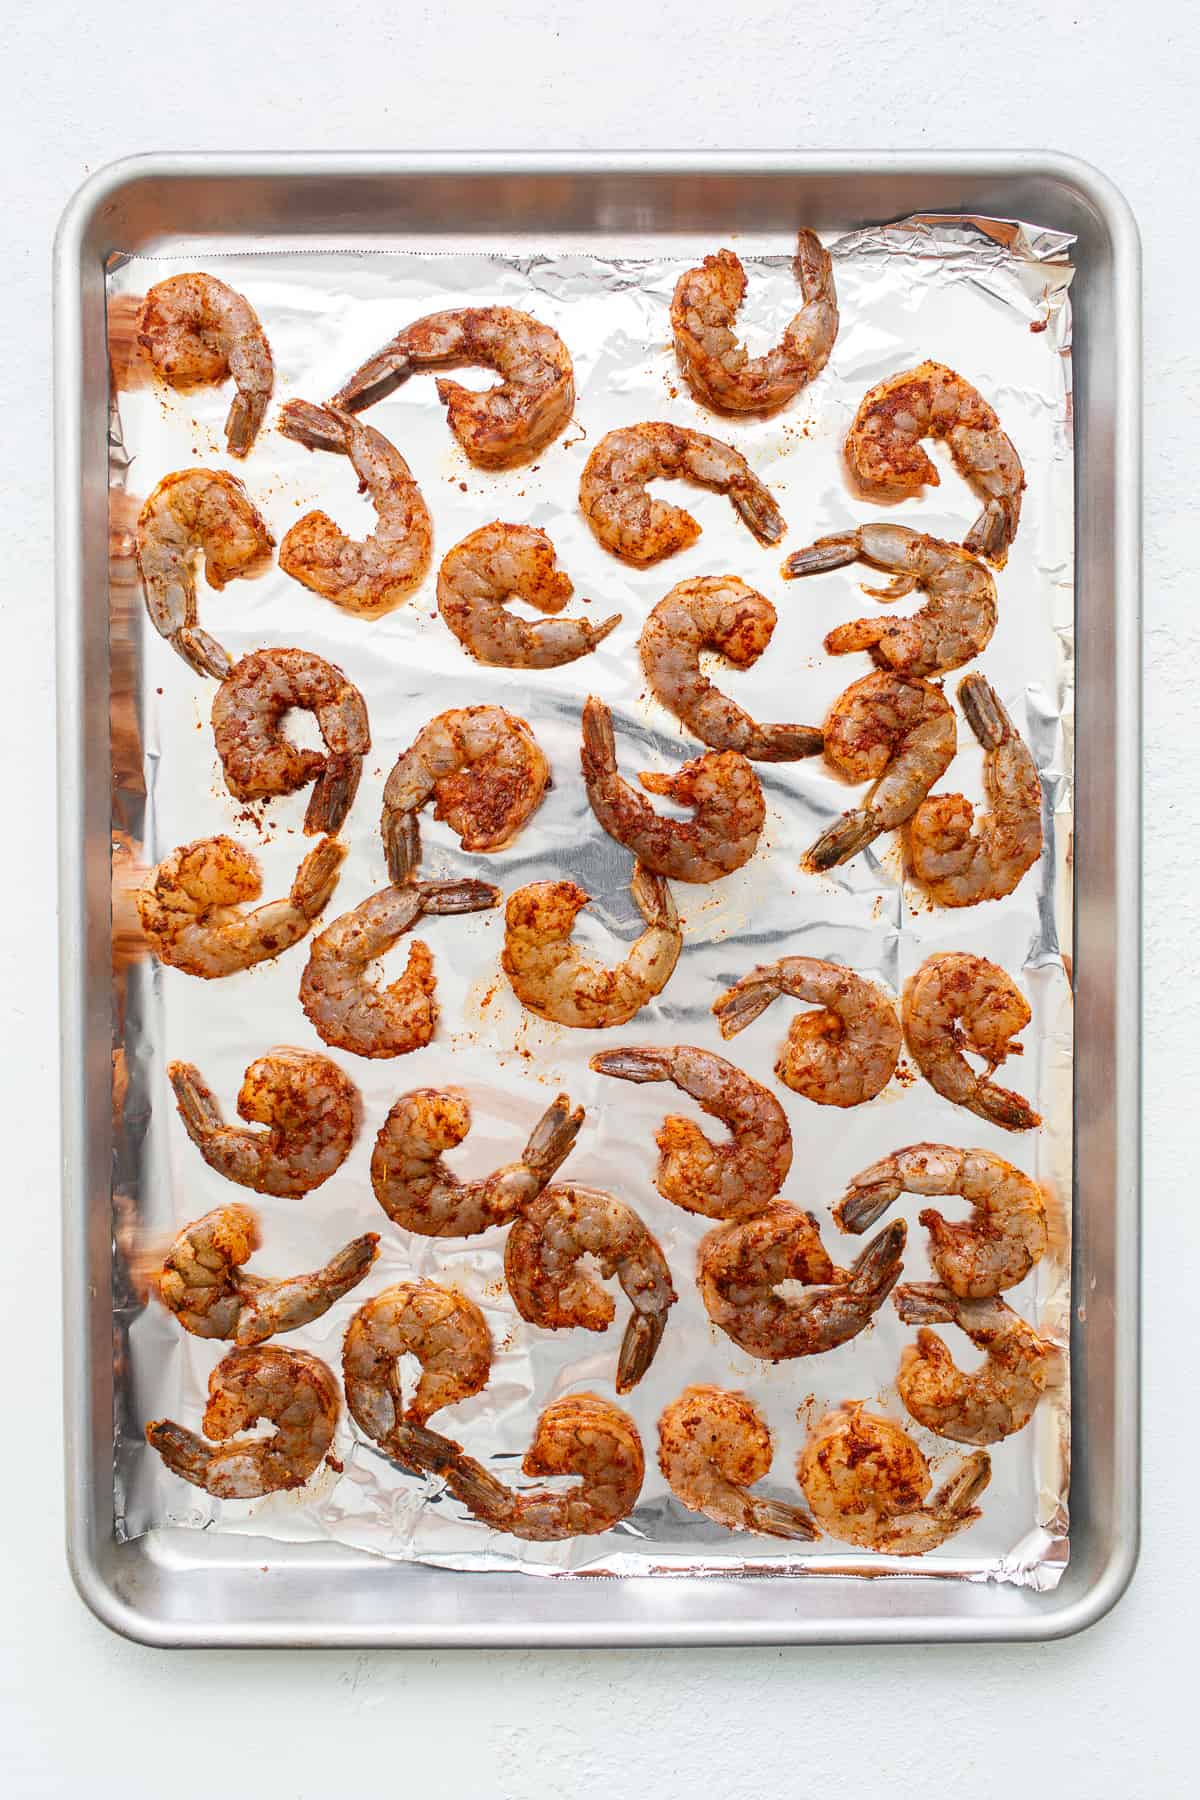 Seasoned shrimp on a baking sheet ready to be broiled.